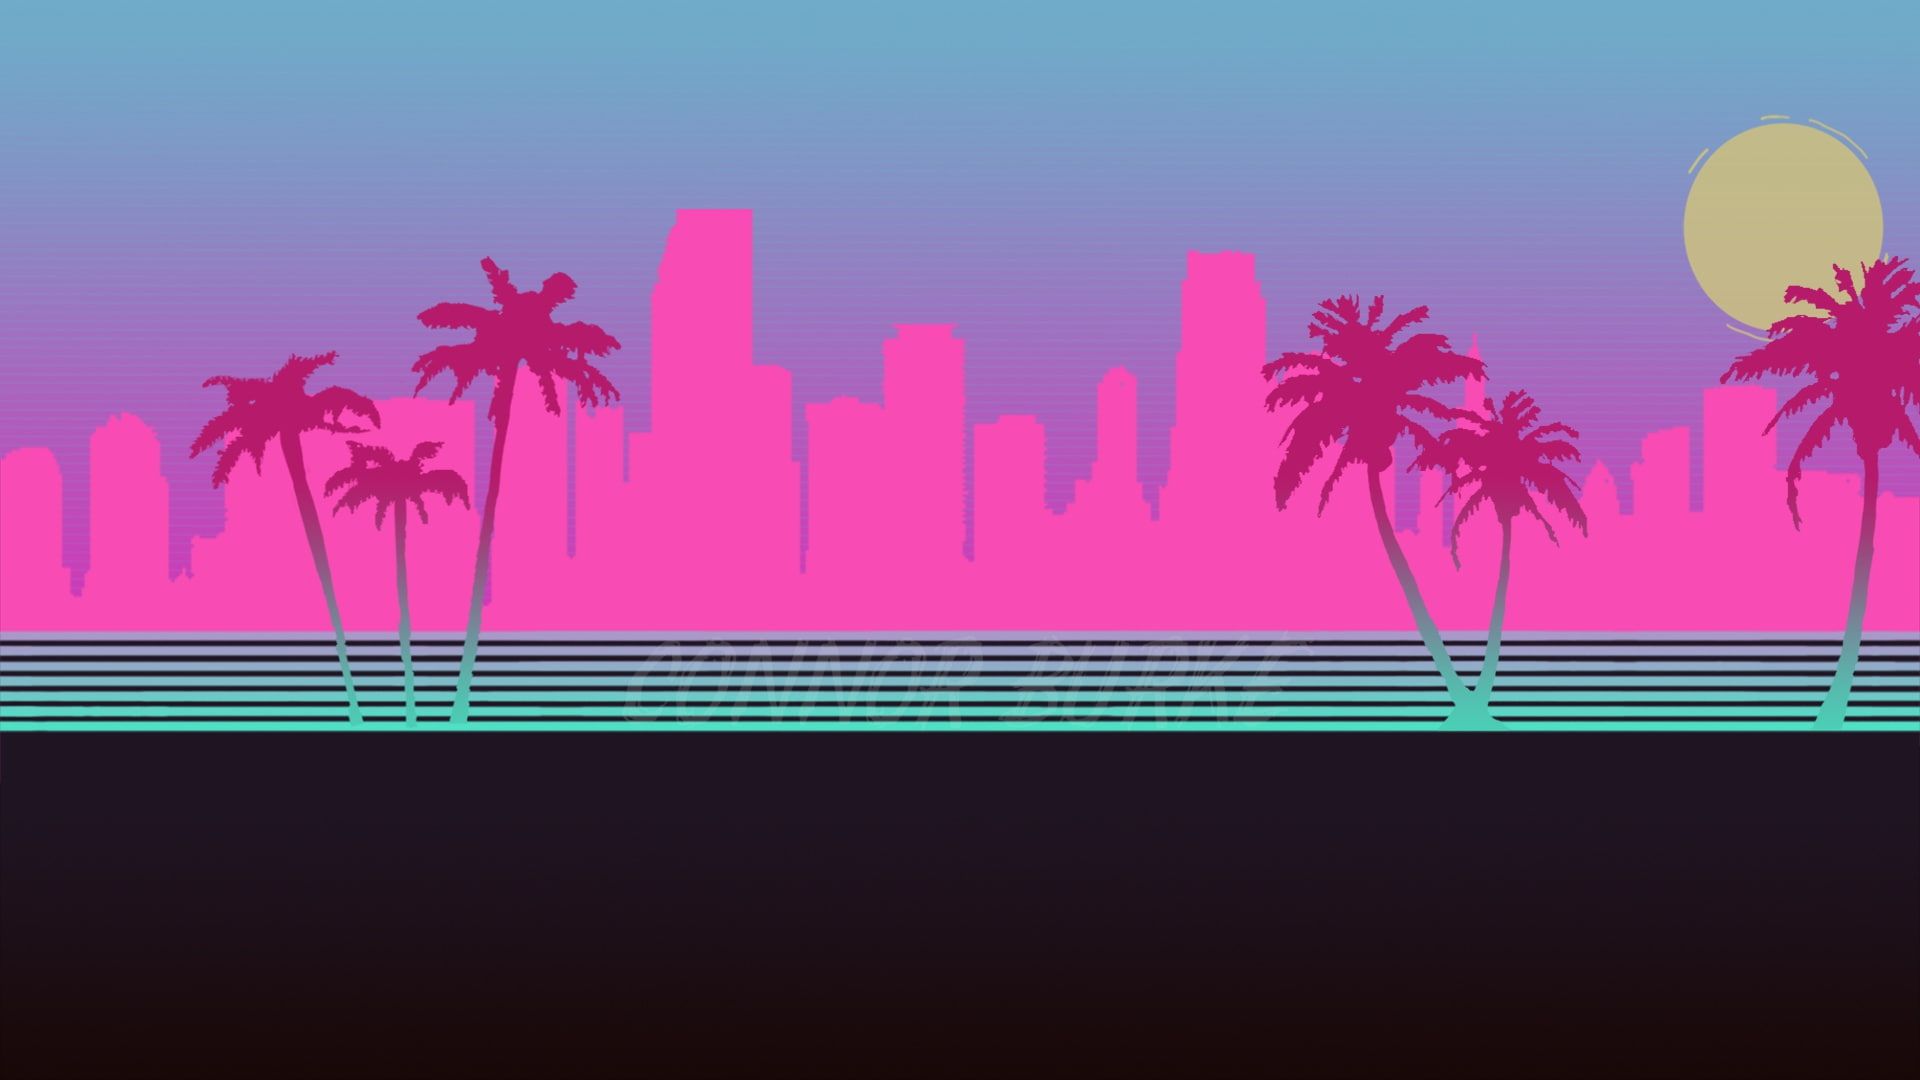 The city #Neon Palm trees #Silhouette #Background Hotline Miami #Synthpop #Darkwave #Synth #Retrowave #Synthw. Miami wallpaper, Vaporwave wallpaper, Hotline miami